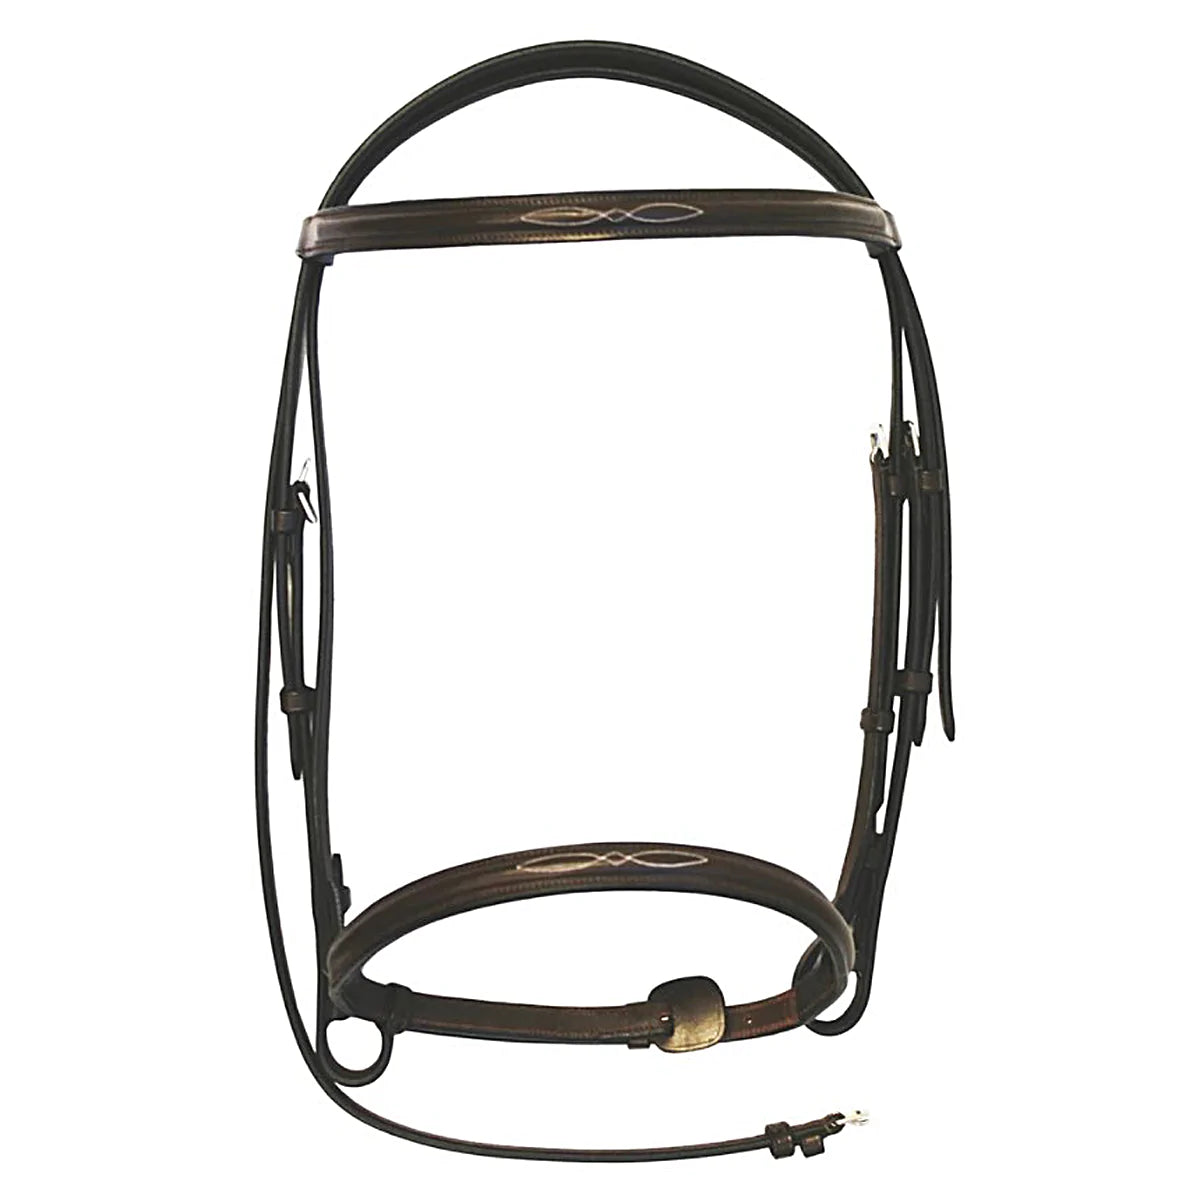 HDR ADVANTAGE RAISED FANCY STITCHED BRIDLE WITH LACED REINS